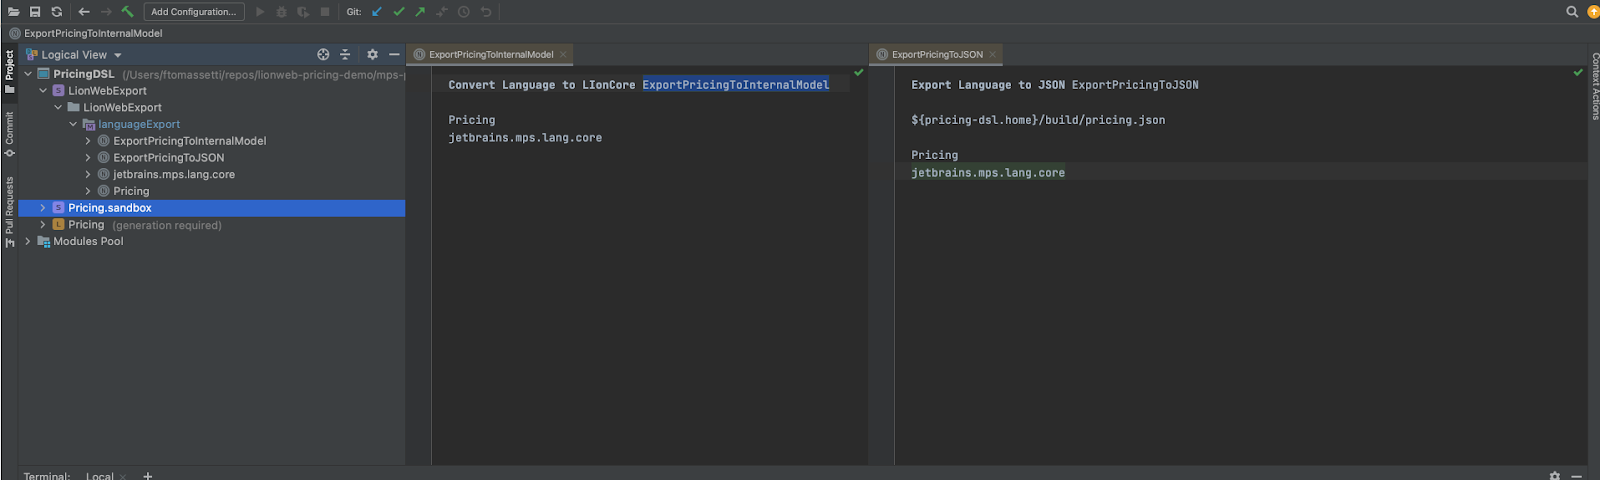 using LionWeb to combine JetBrains MPS with Kotlin